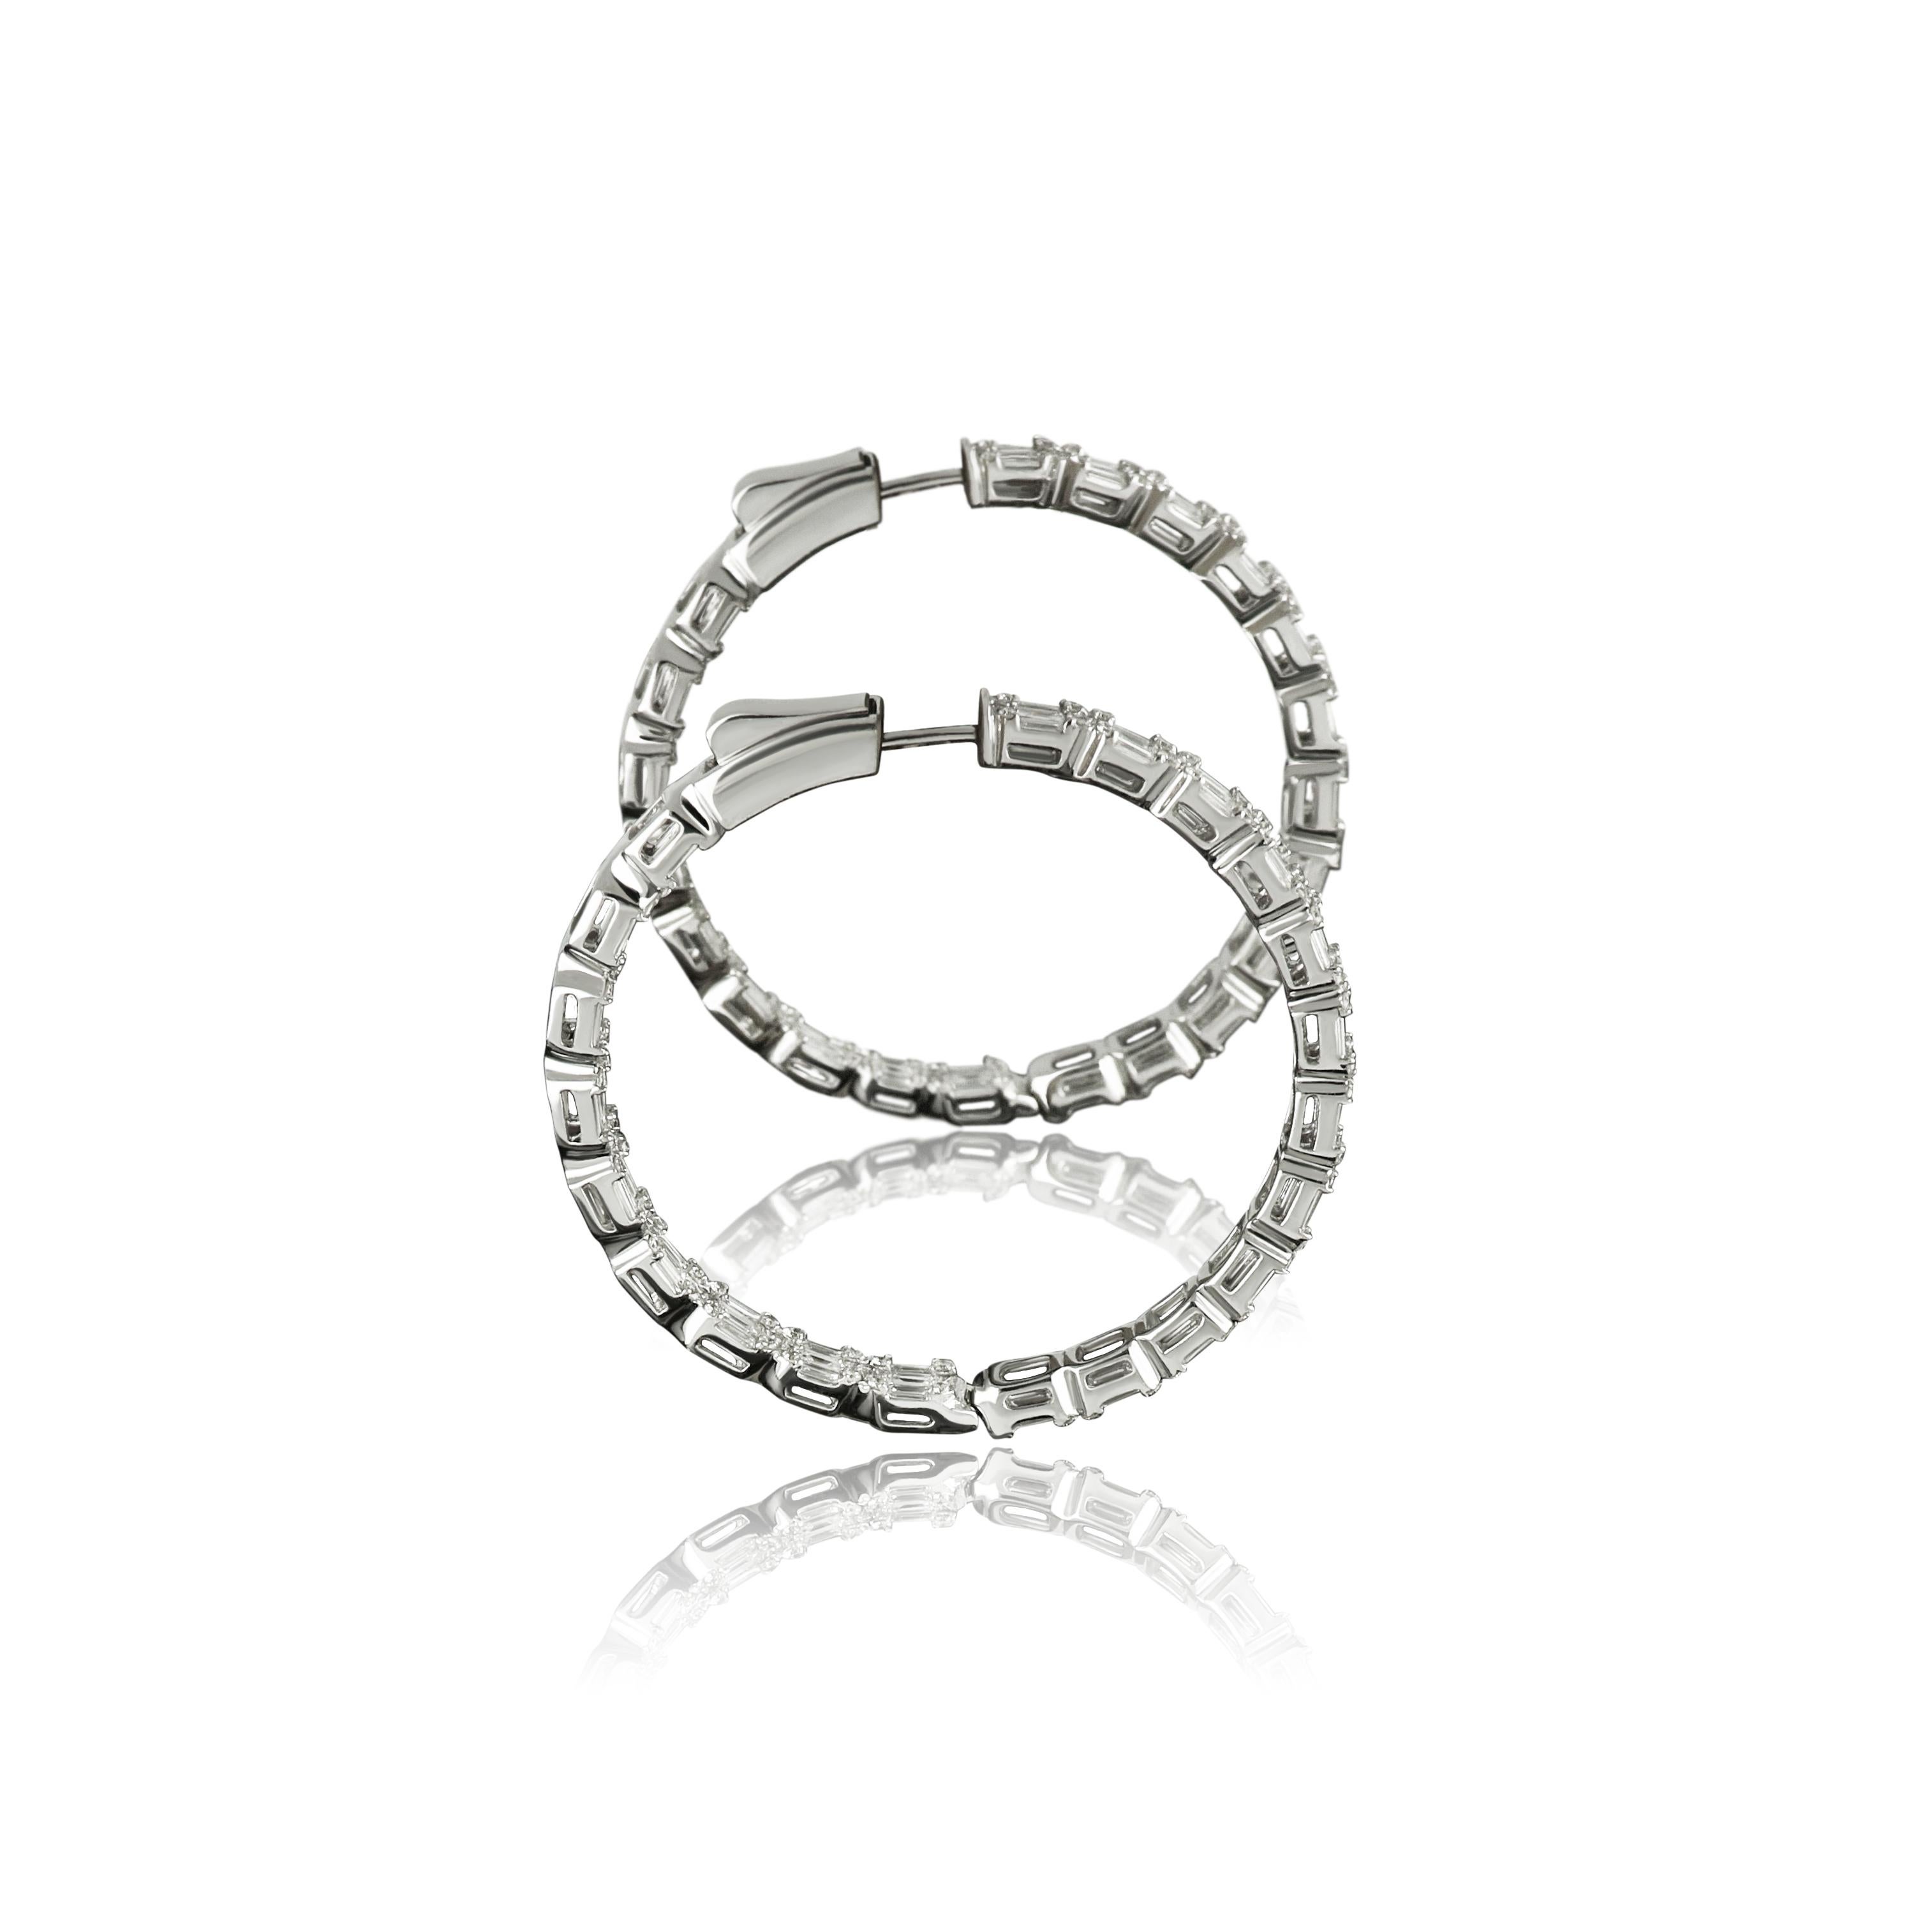 A fascinating demonstration of modern design, Amwaj 18 karat white gold diamond hoop earrings feature smooth row of diamonds that loops gracefully around the ear. Baguette and round cut diamonds are subtly joined to create a shining circle of